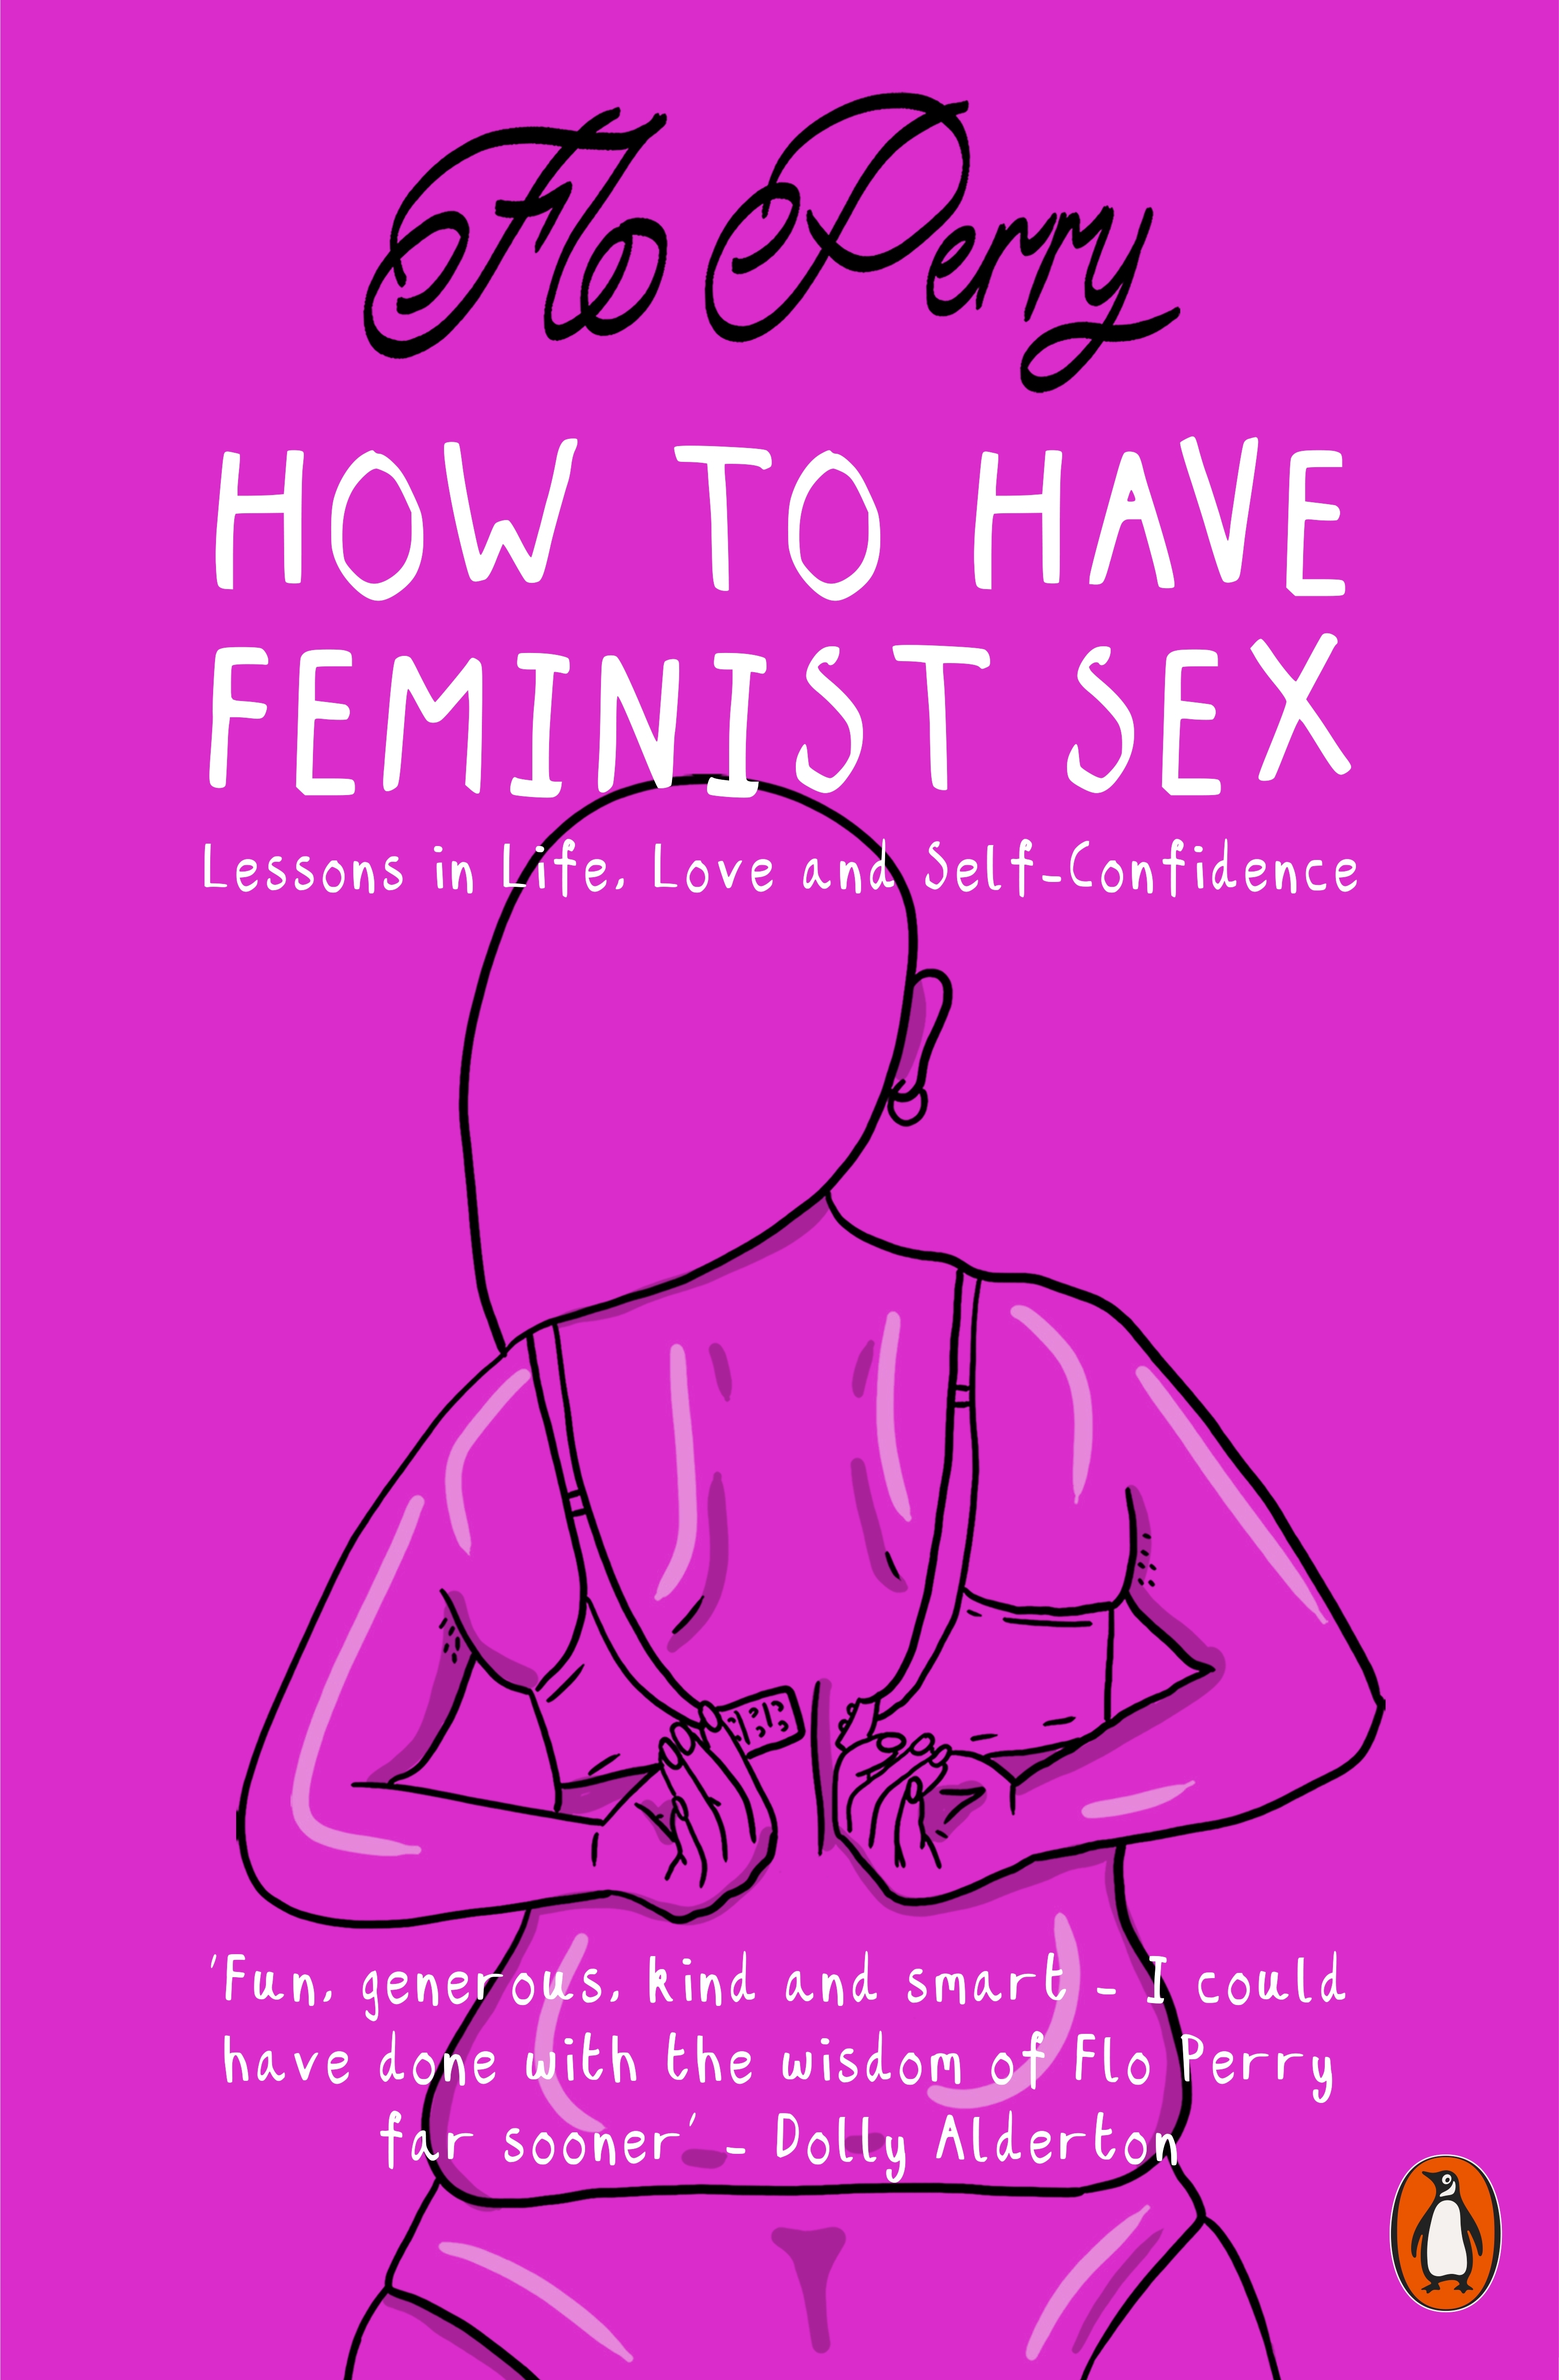 How To Have Feminist Sex By Flo Perry Penguin Books New Zealand